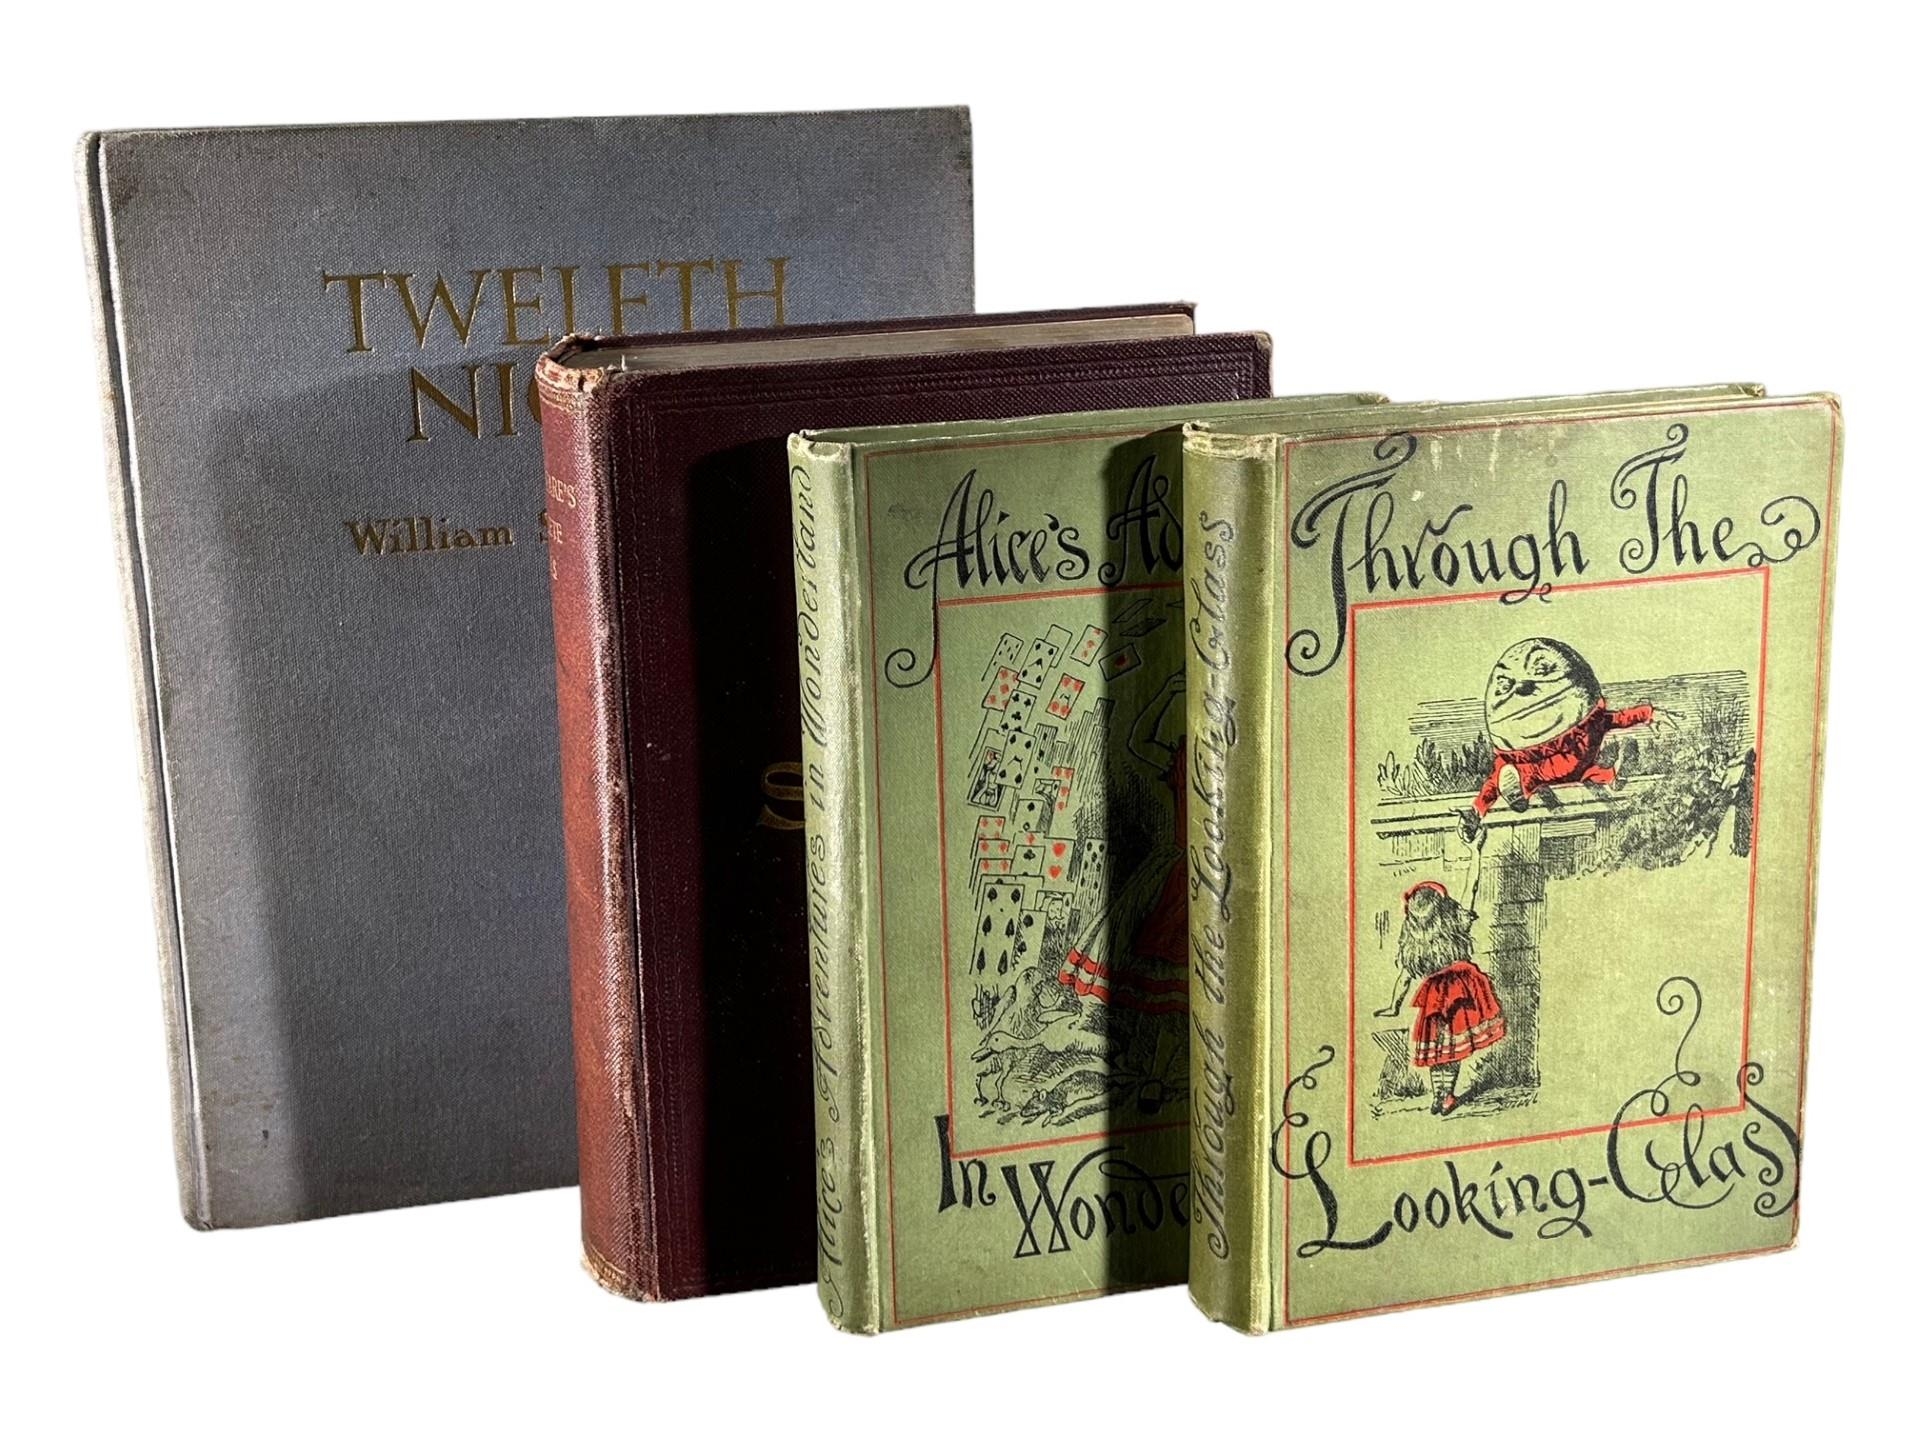 LEWIS CARROLL, ‘ALICE’S ADVENTURES IN WONDERLAND’ AND ‘THROUGH THE LOOKING GLASS’ BOOKS, PUBLISHED